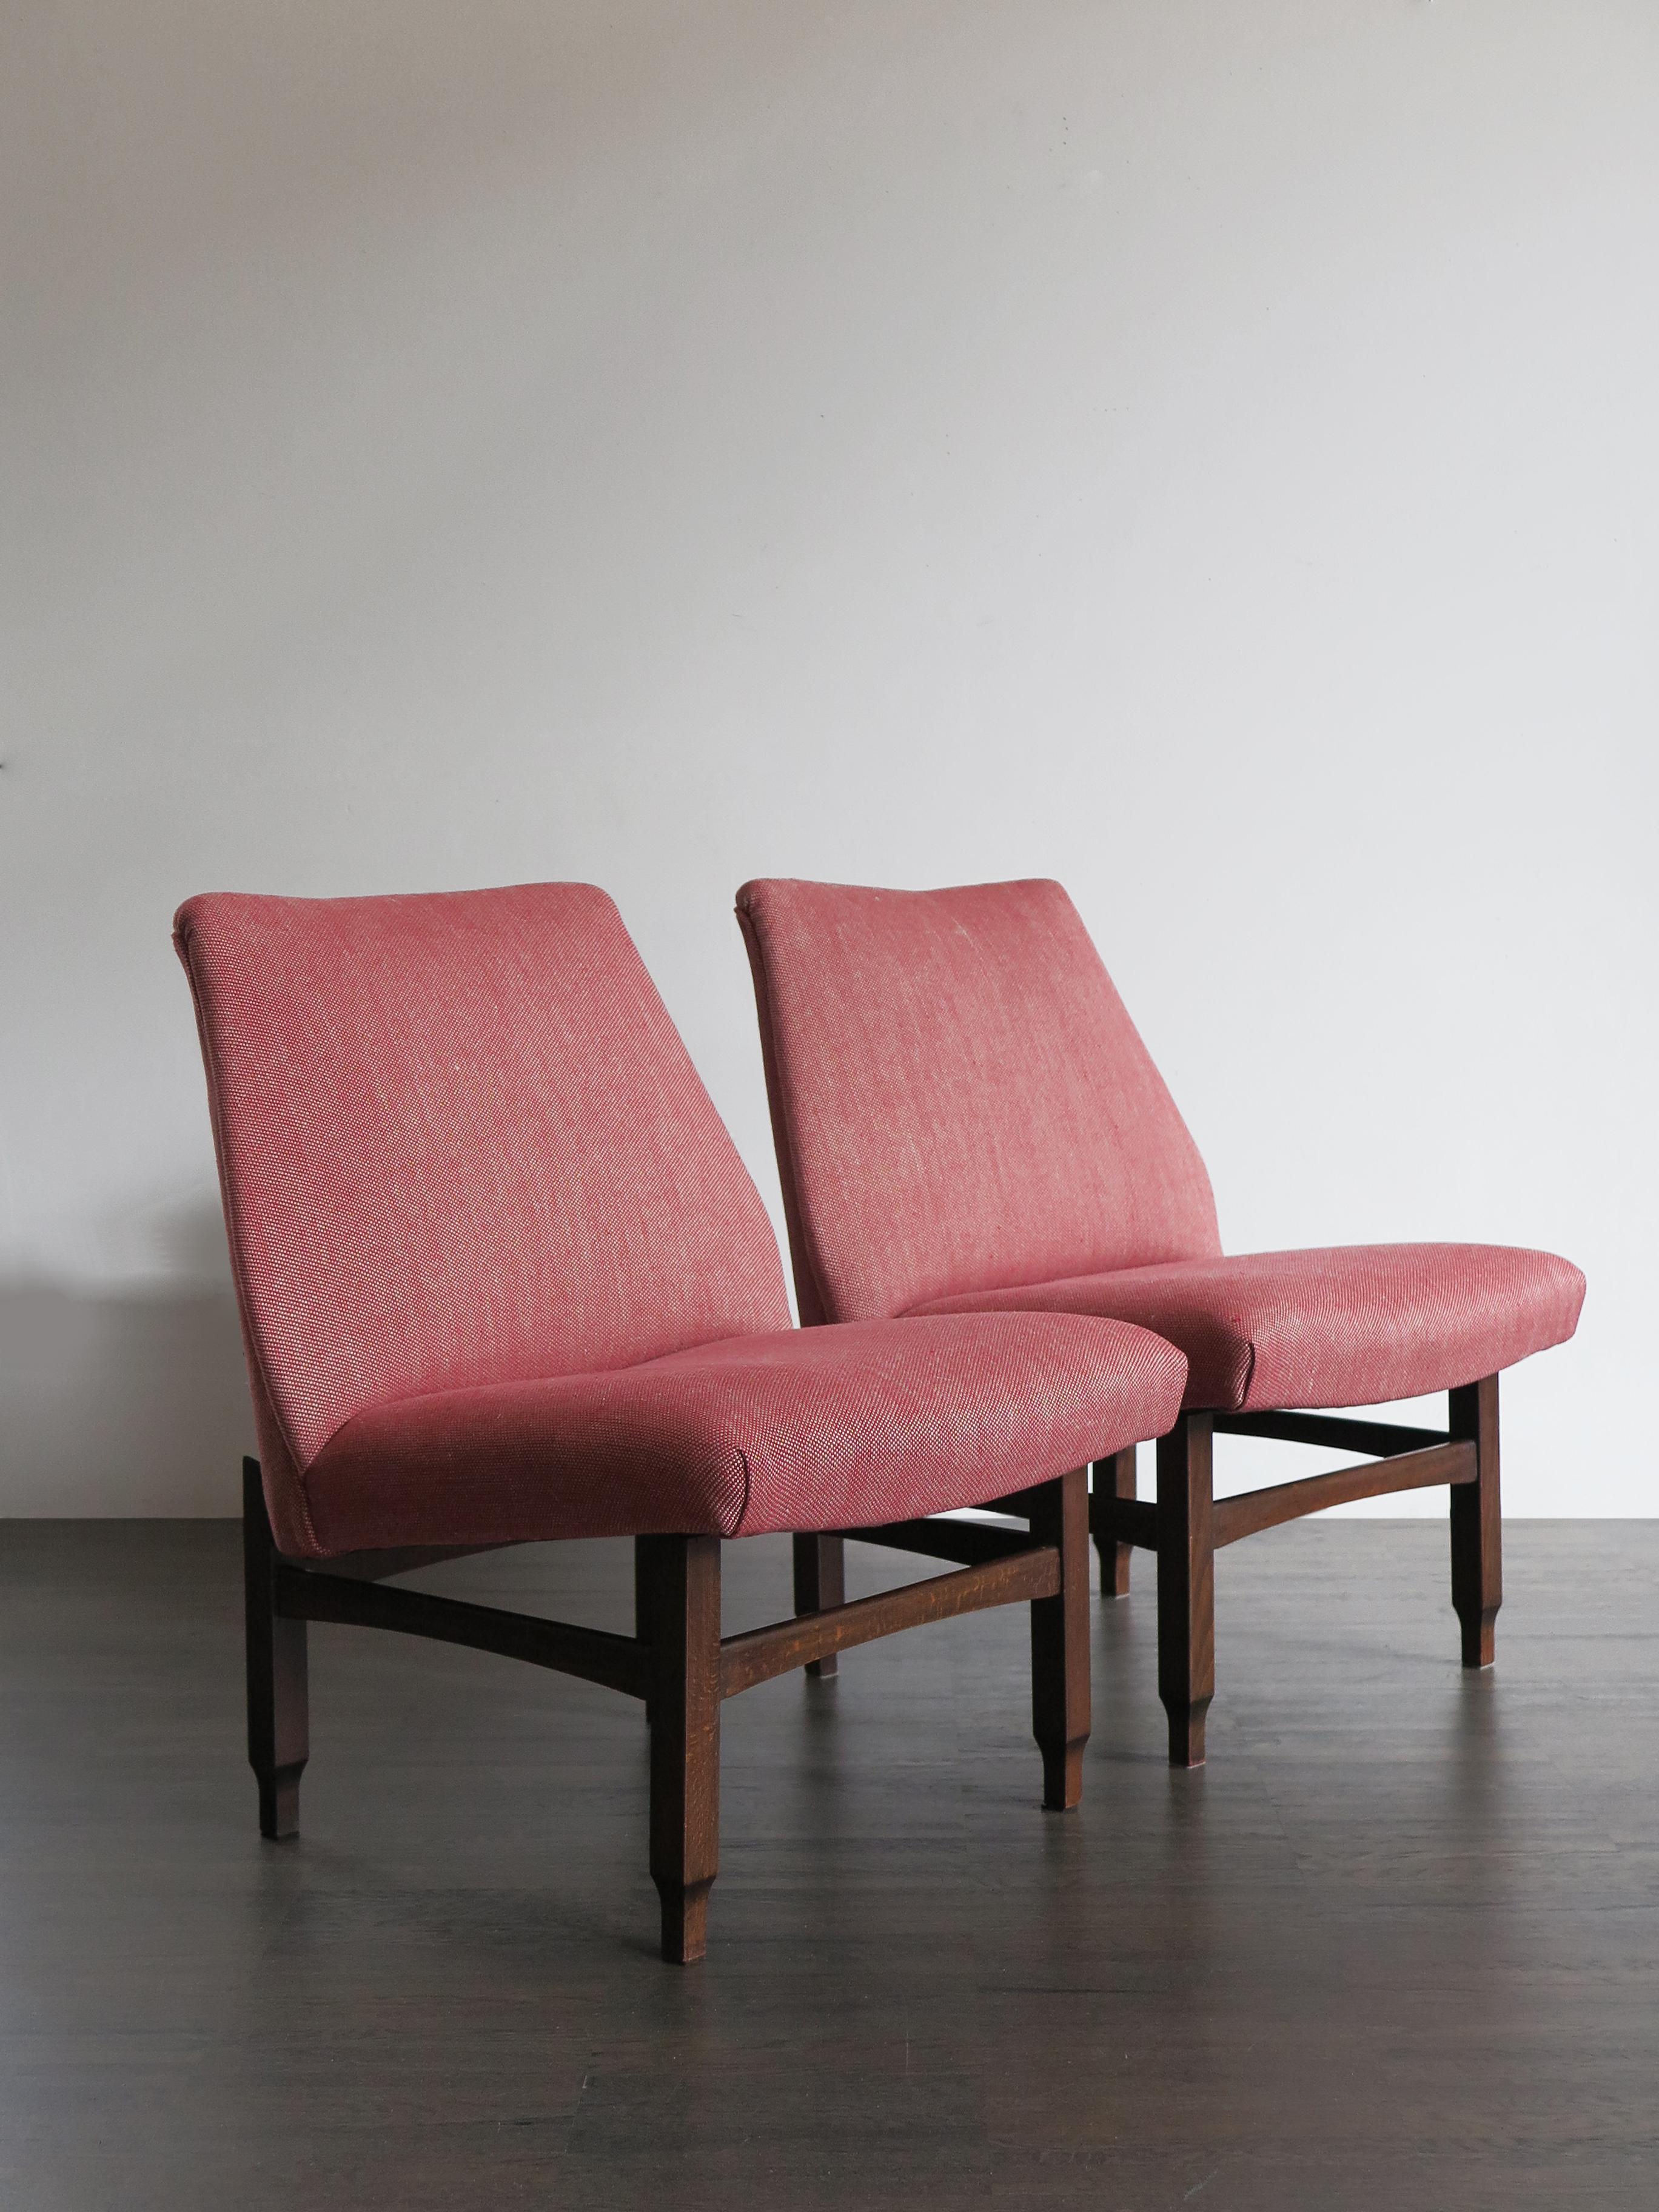 Mid-Century Modern Italian Midcentury Modern Design Wood and Red Fabric Armchairs, 1950s For Sale